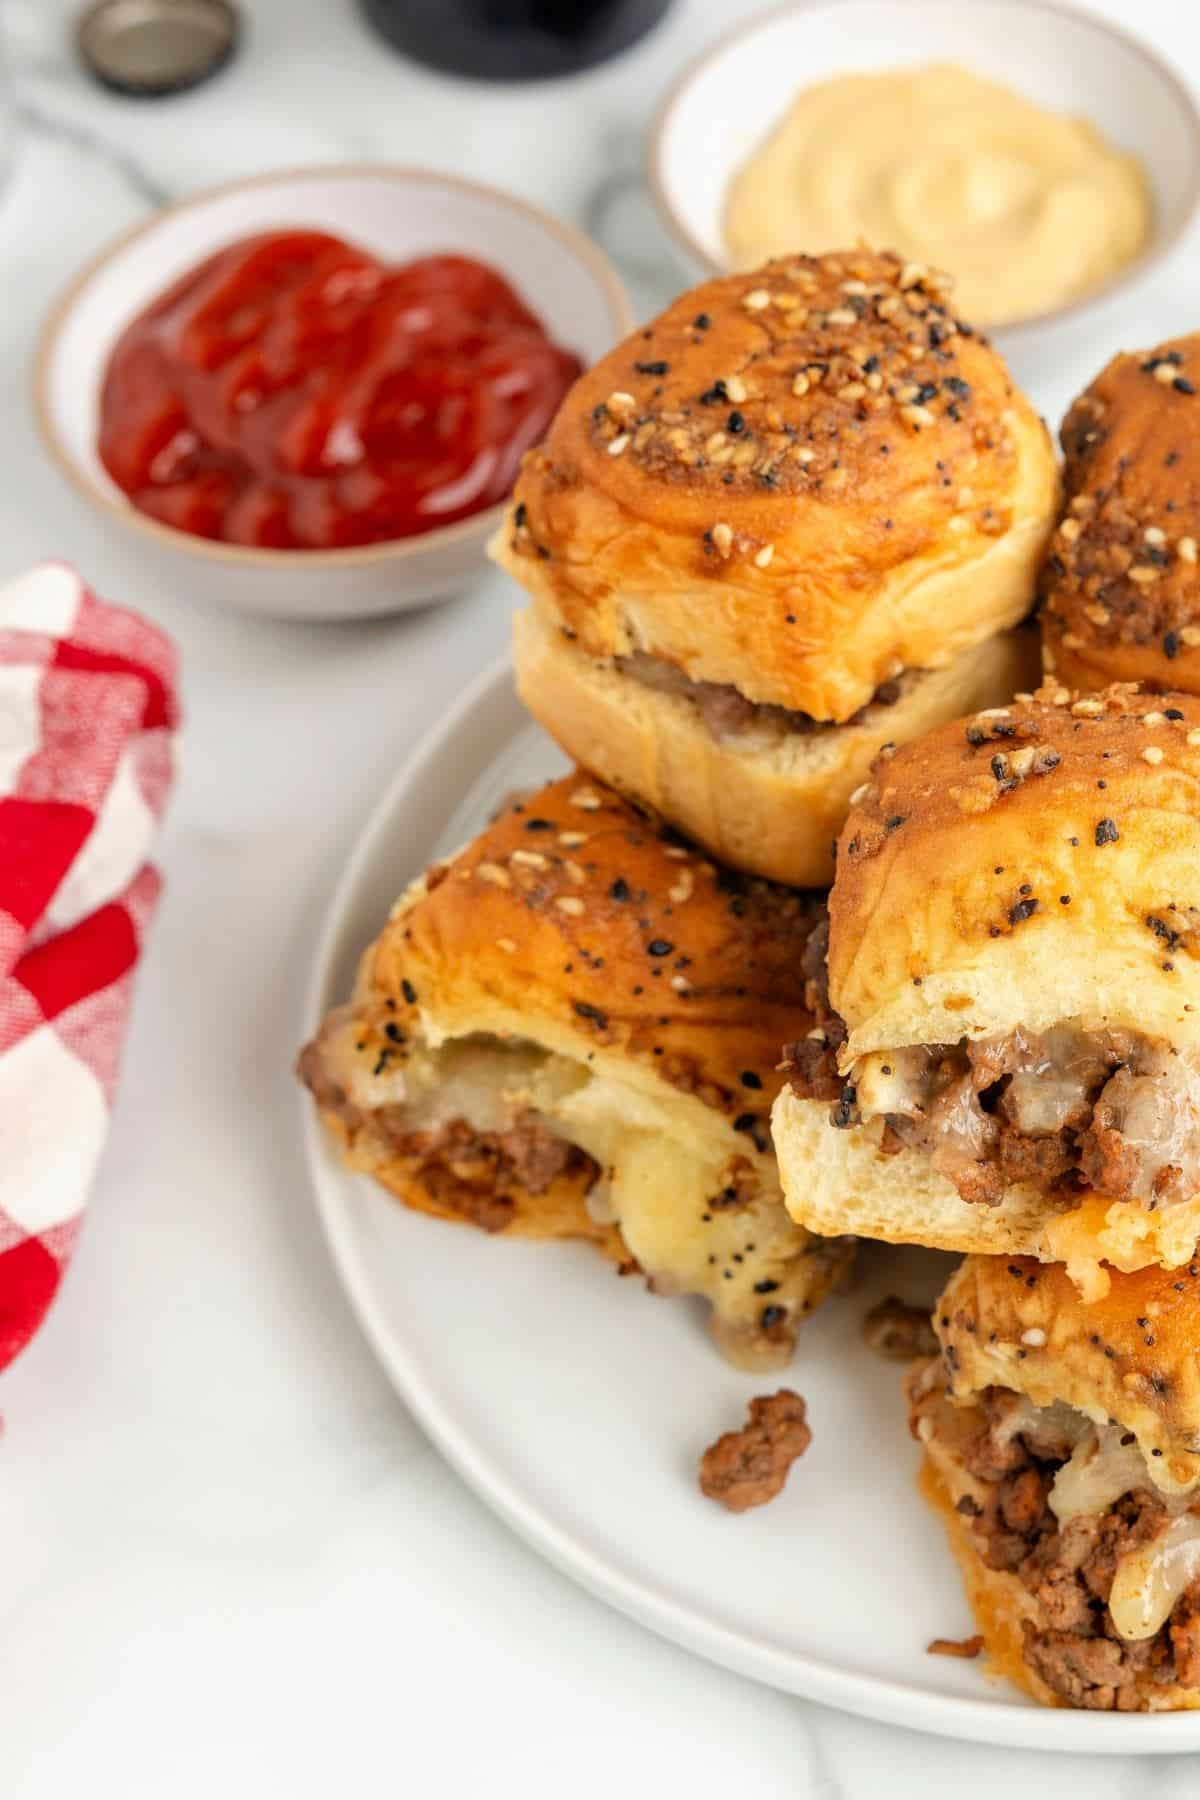 Cheeseburger sliders on plate with ketchup and dipping sauces behind. 